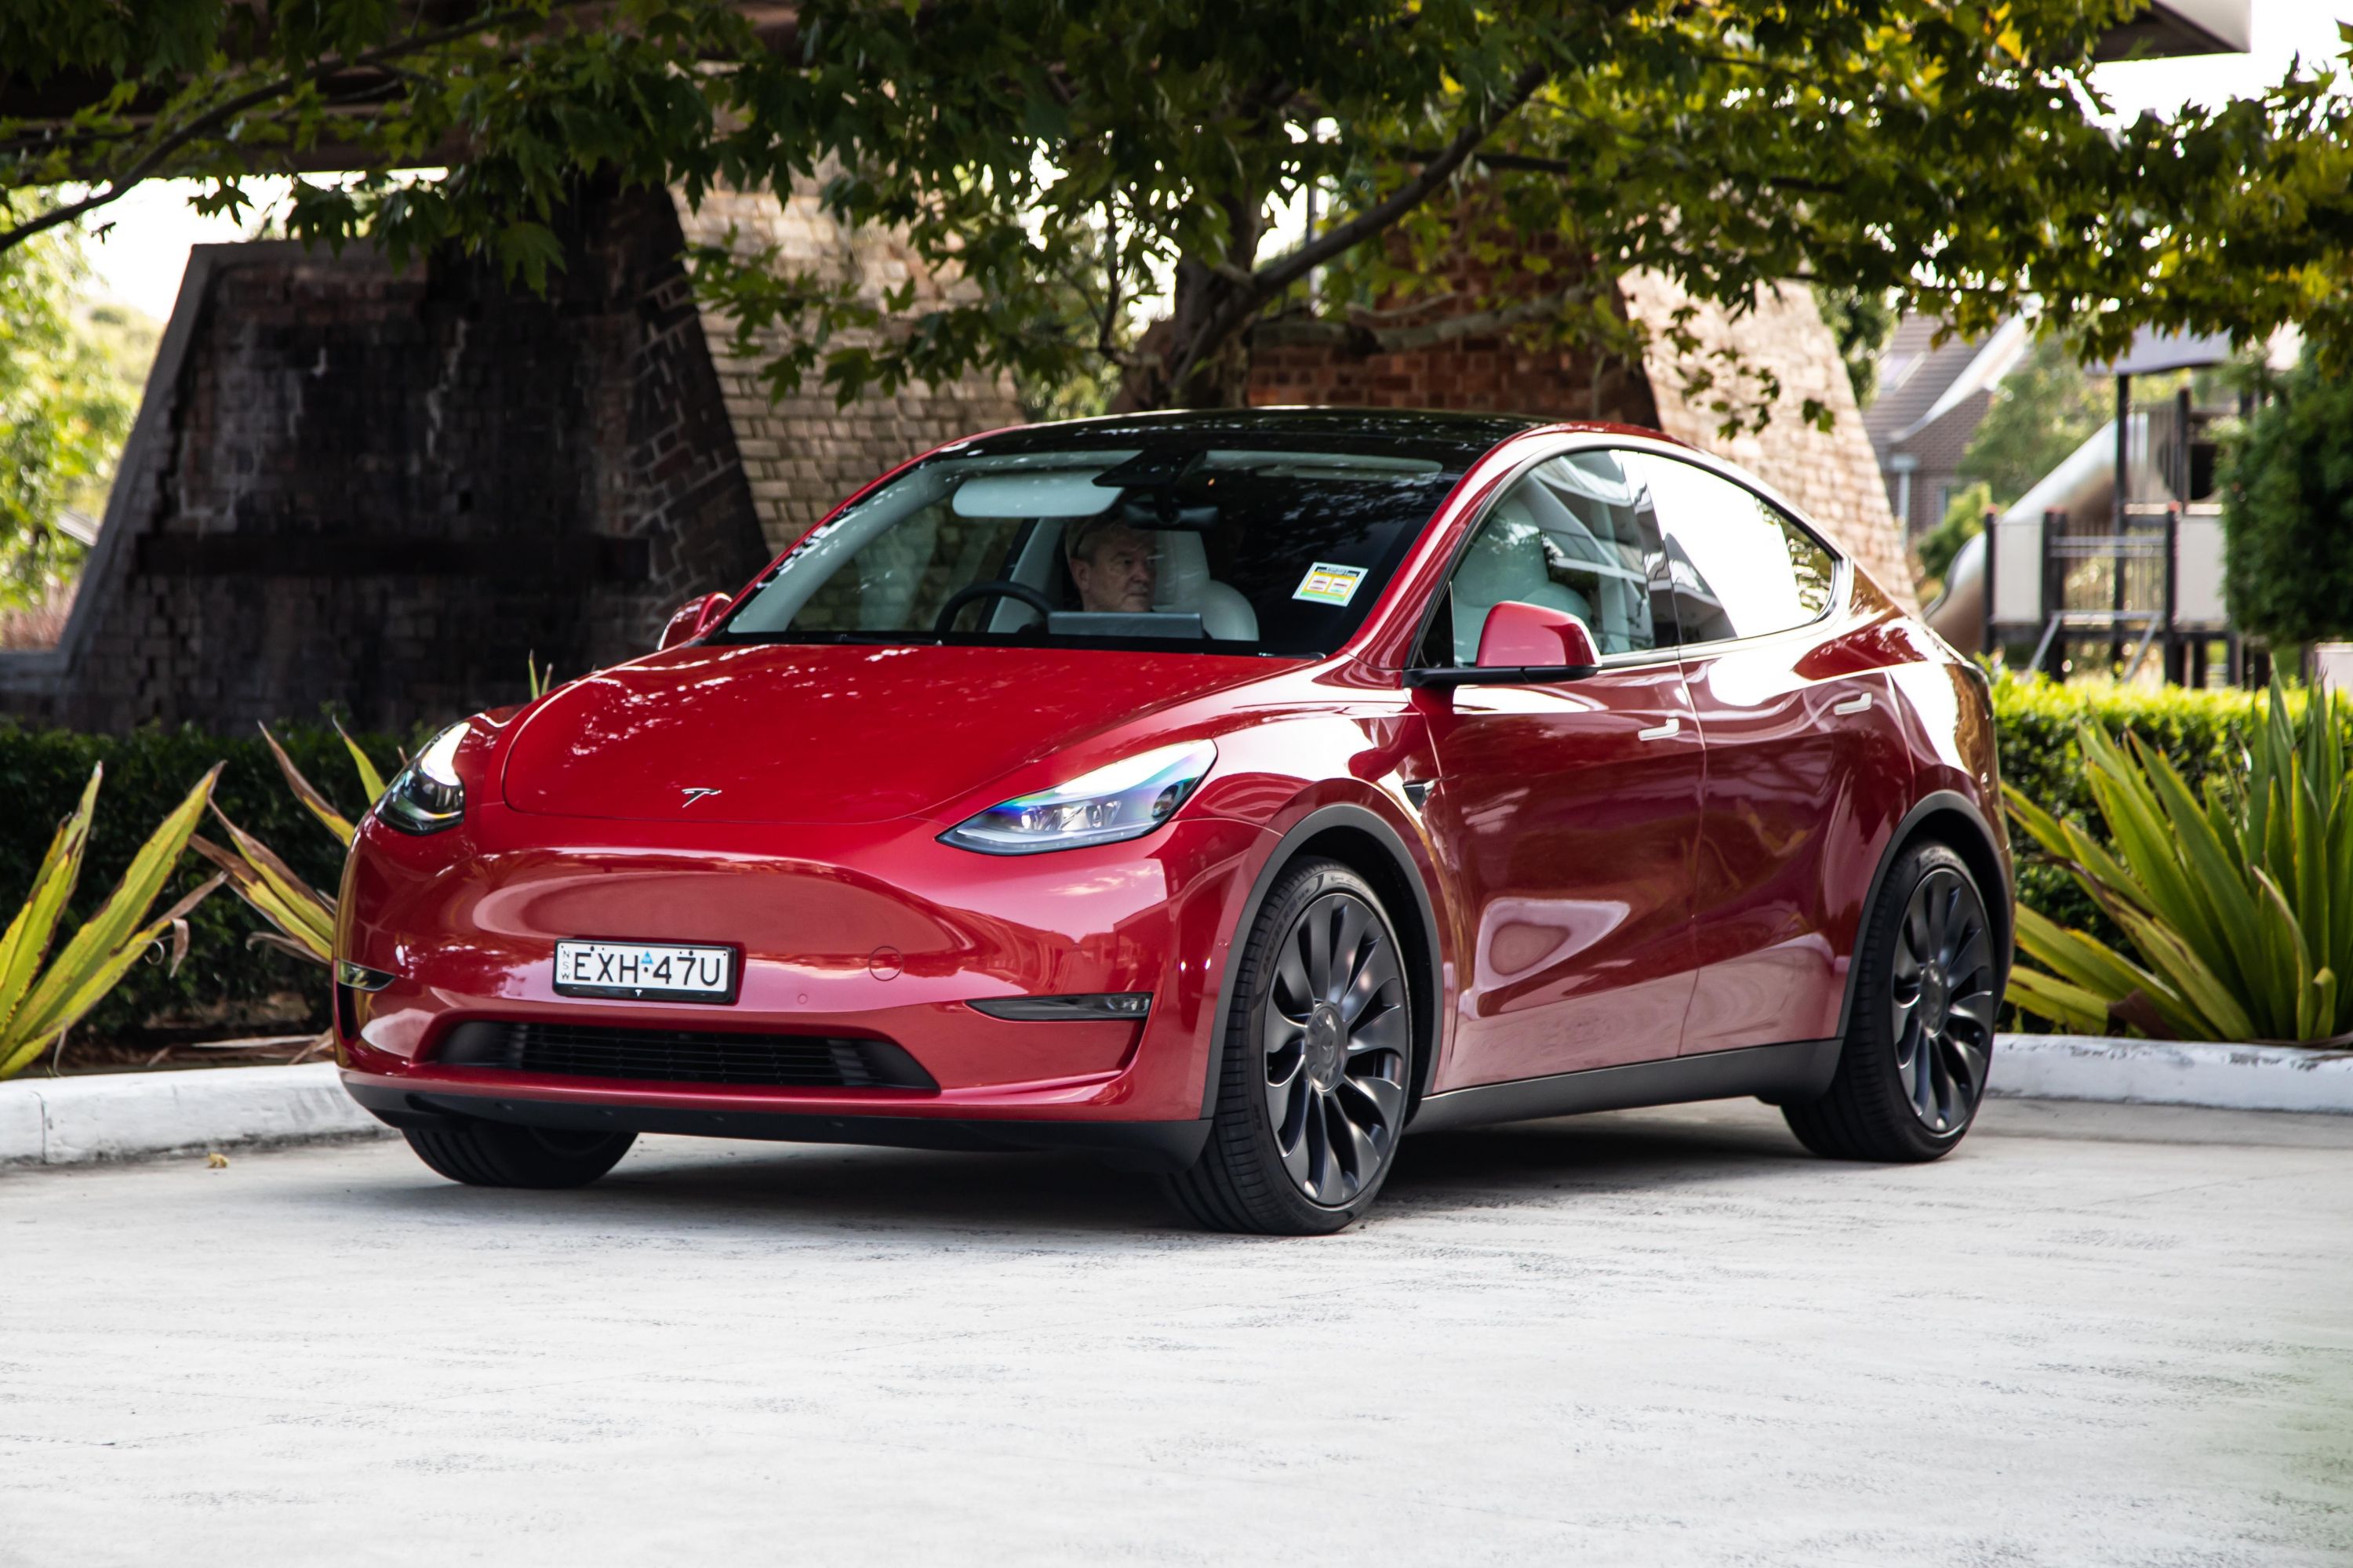 Is the 2021 Tesla Model Y a Good SUV? 5 Pros and 4 Cons